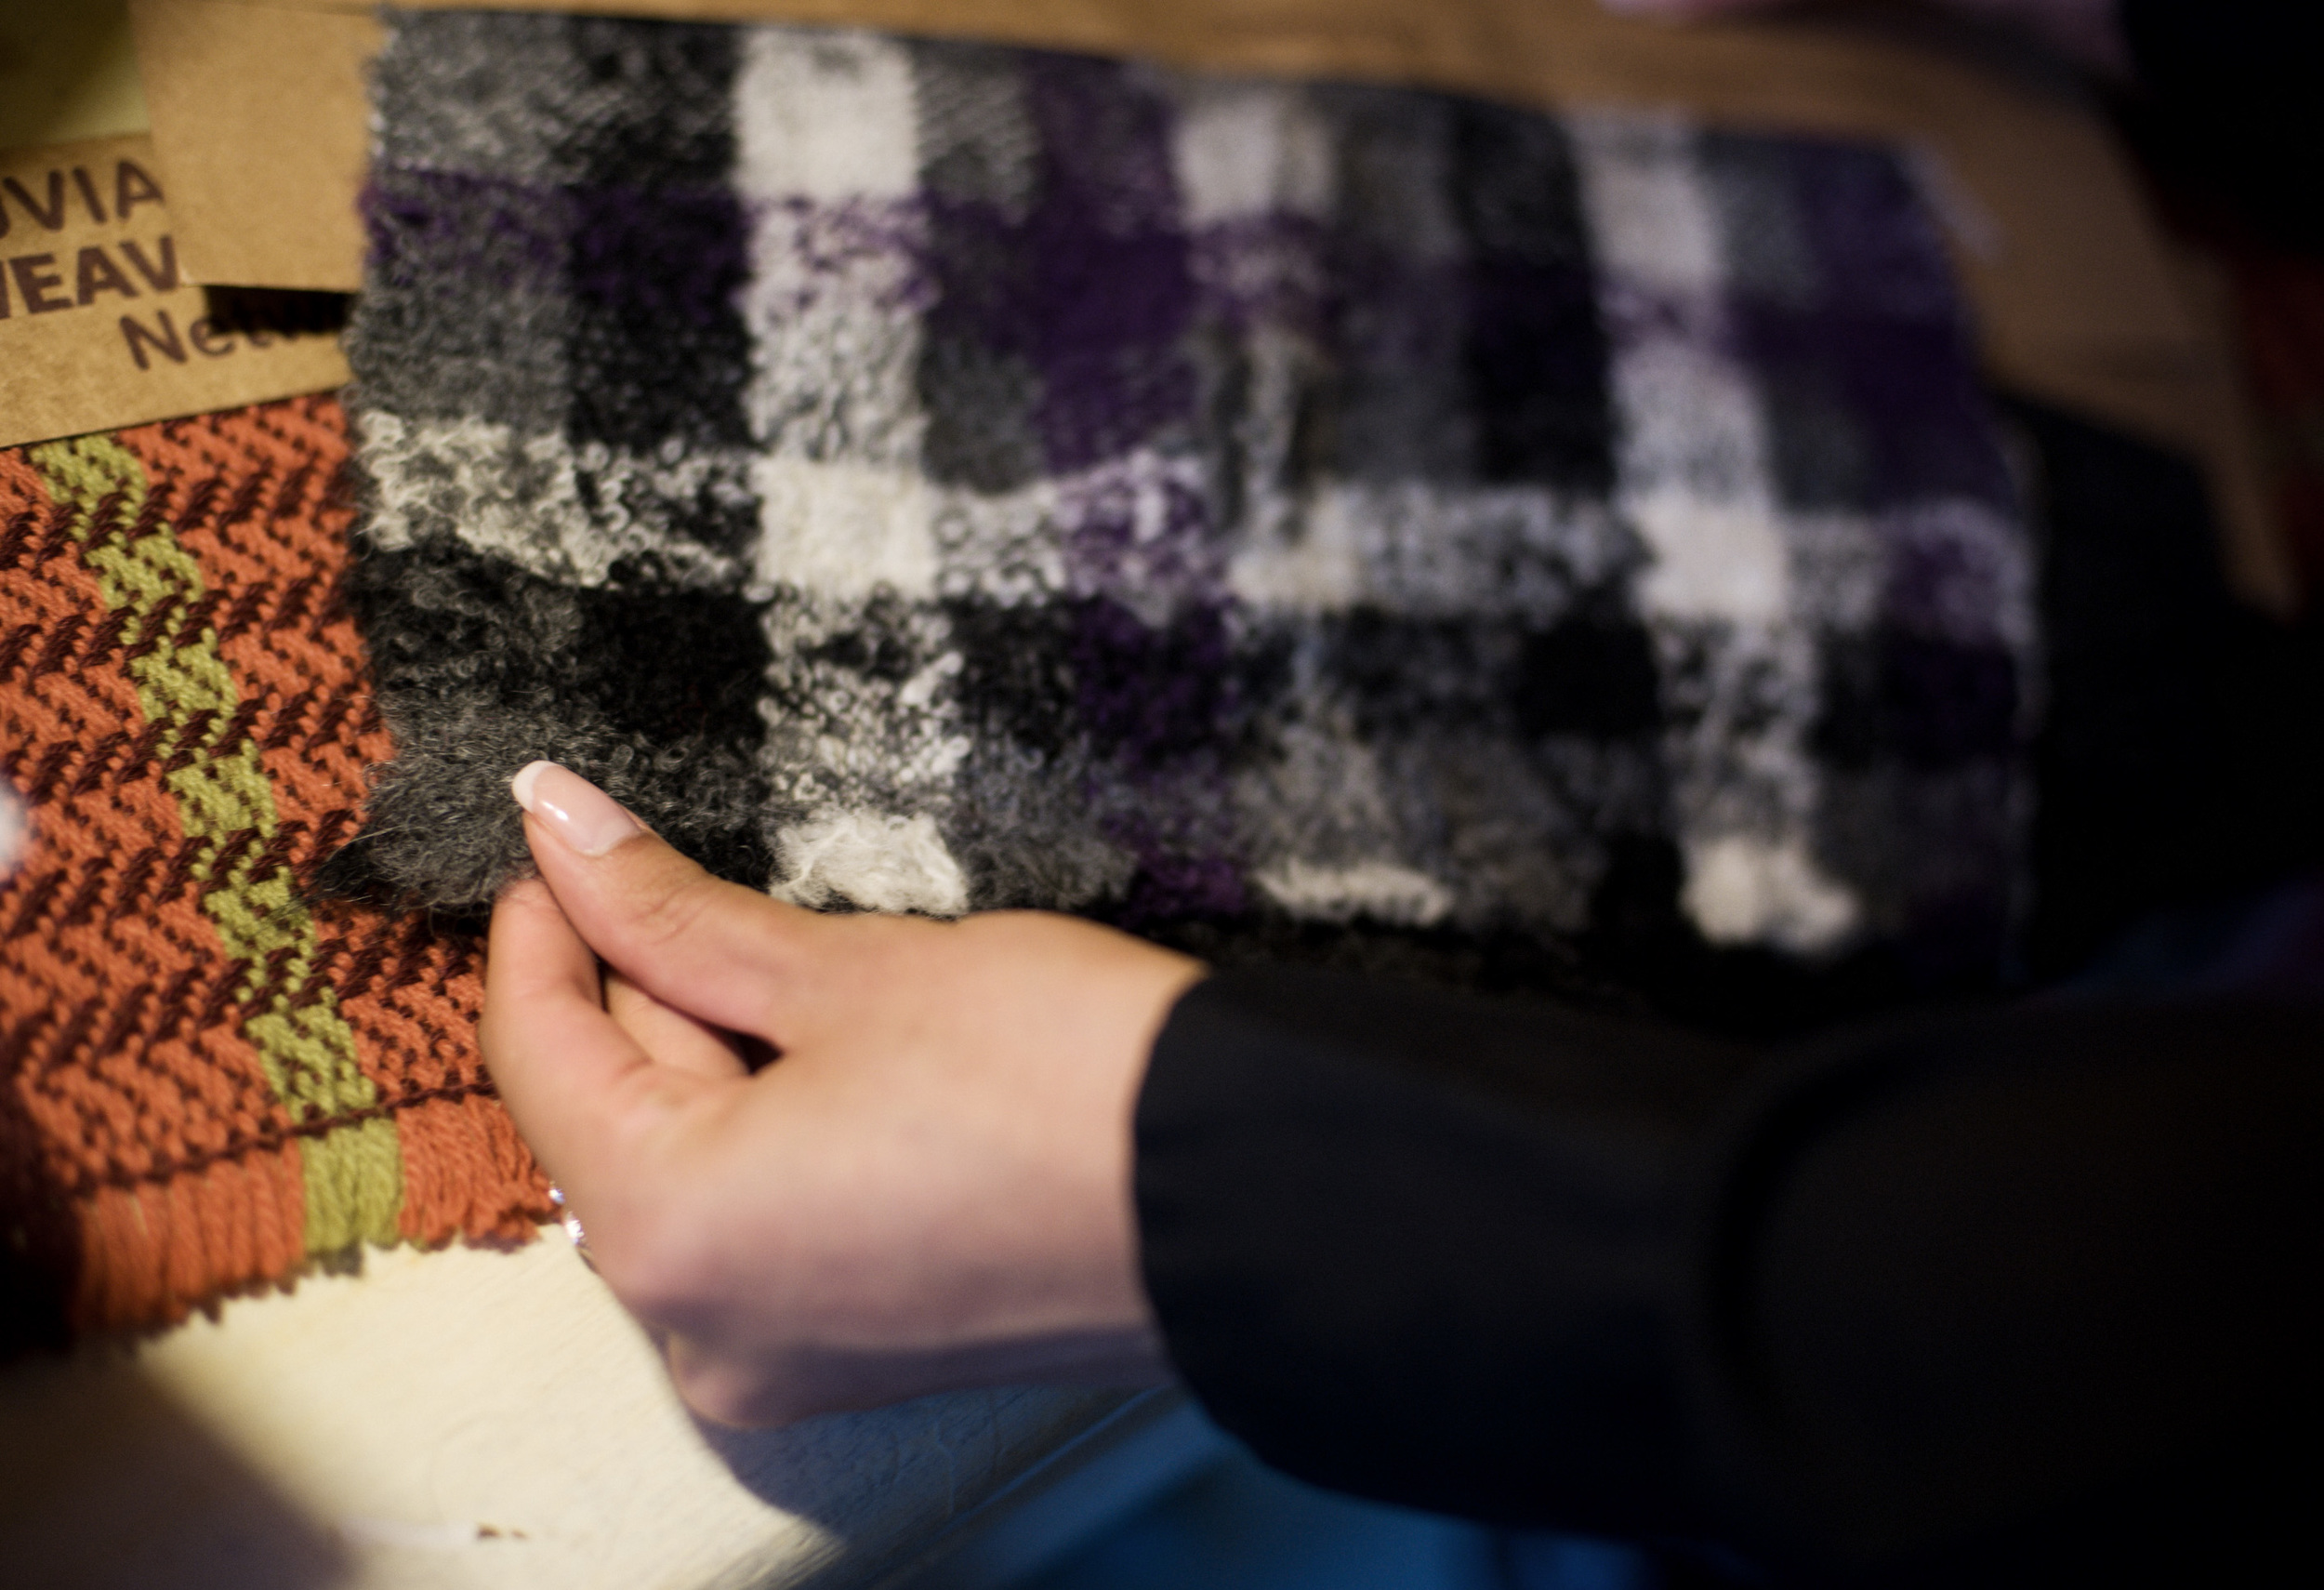  Benita tests the hand of one of the Peruvian textiles recently brought back from a sourcing trip. 